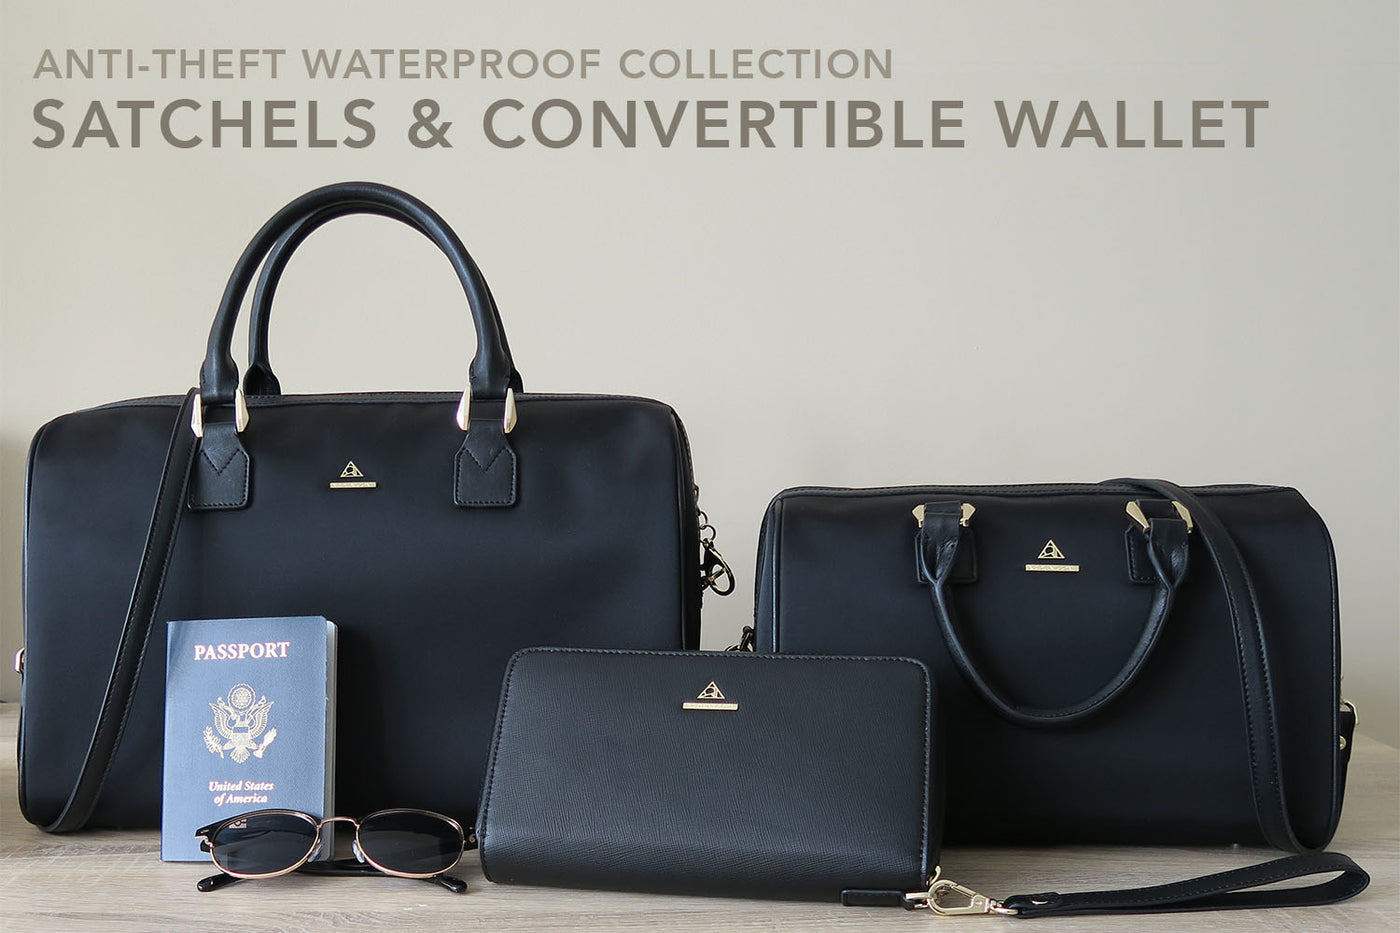 New Arden Cove Bags! Introducing Surie Satchels and Marina Wallet! + GIVEAWAY